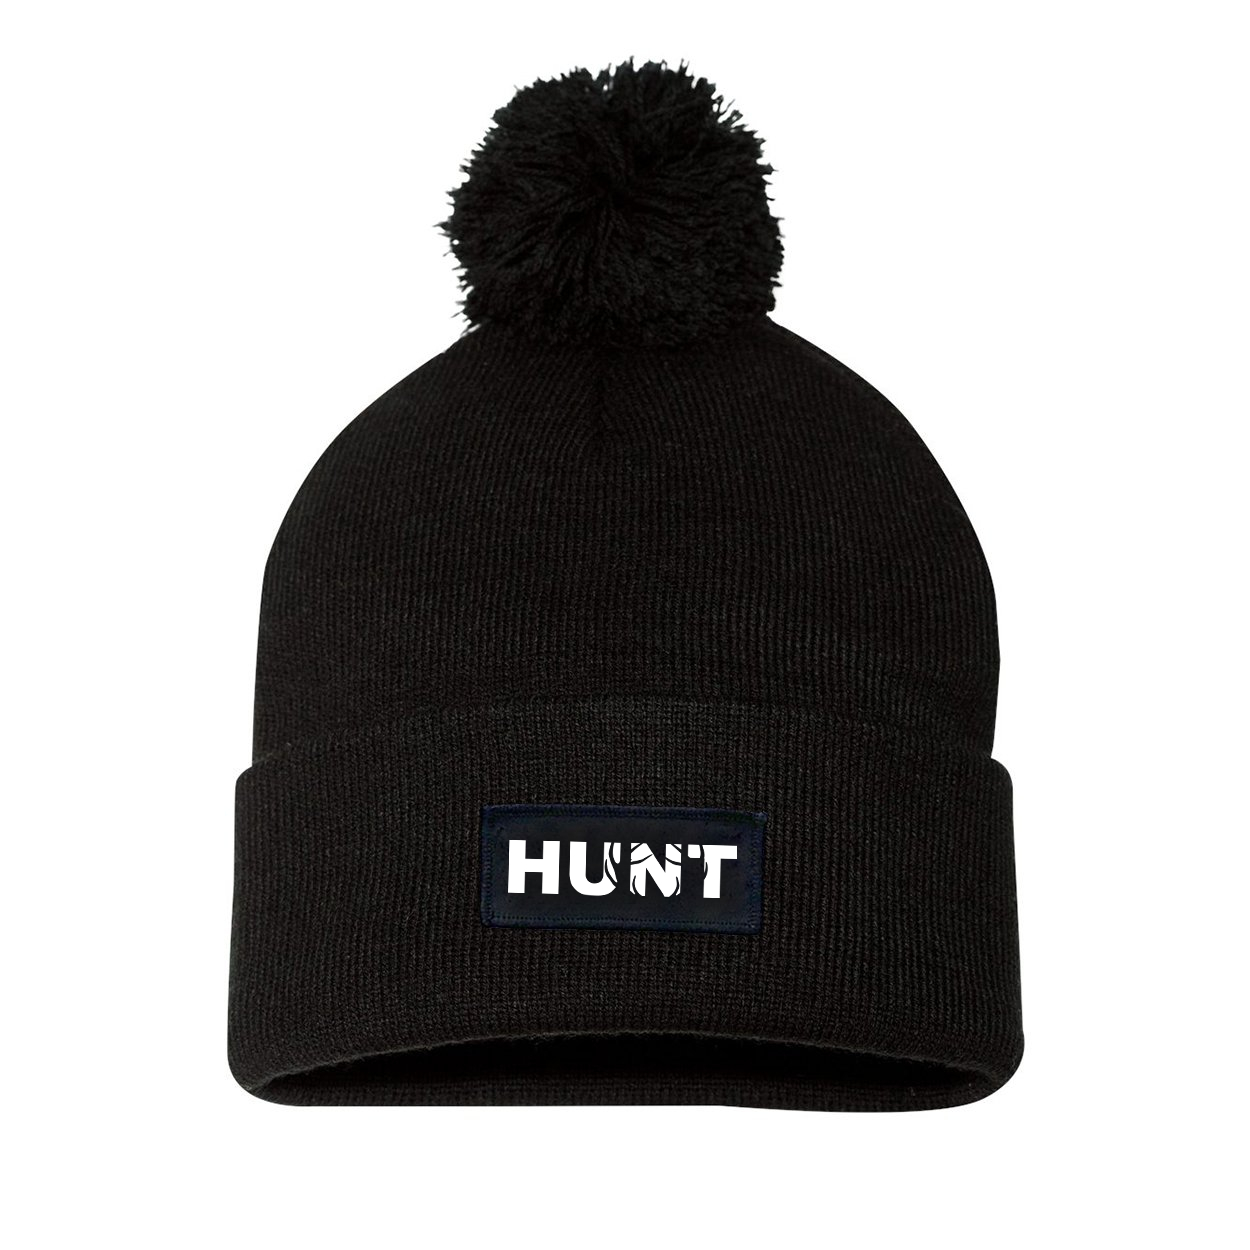 Hunt Rack Logo Night Out Woven Patch Roll Up Pom Knit Beanie Black (White Logo)